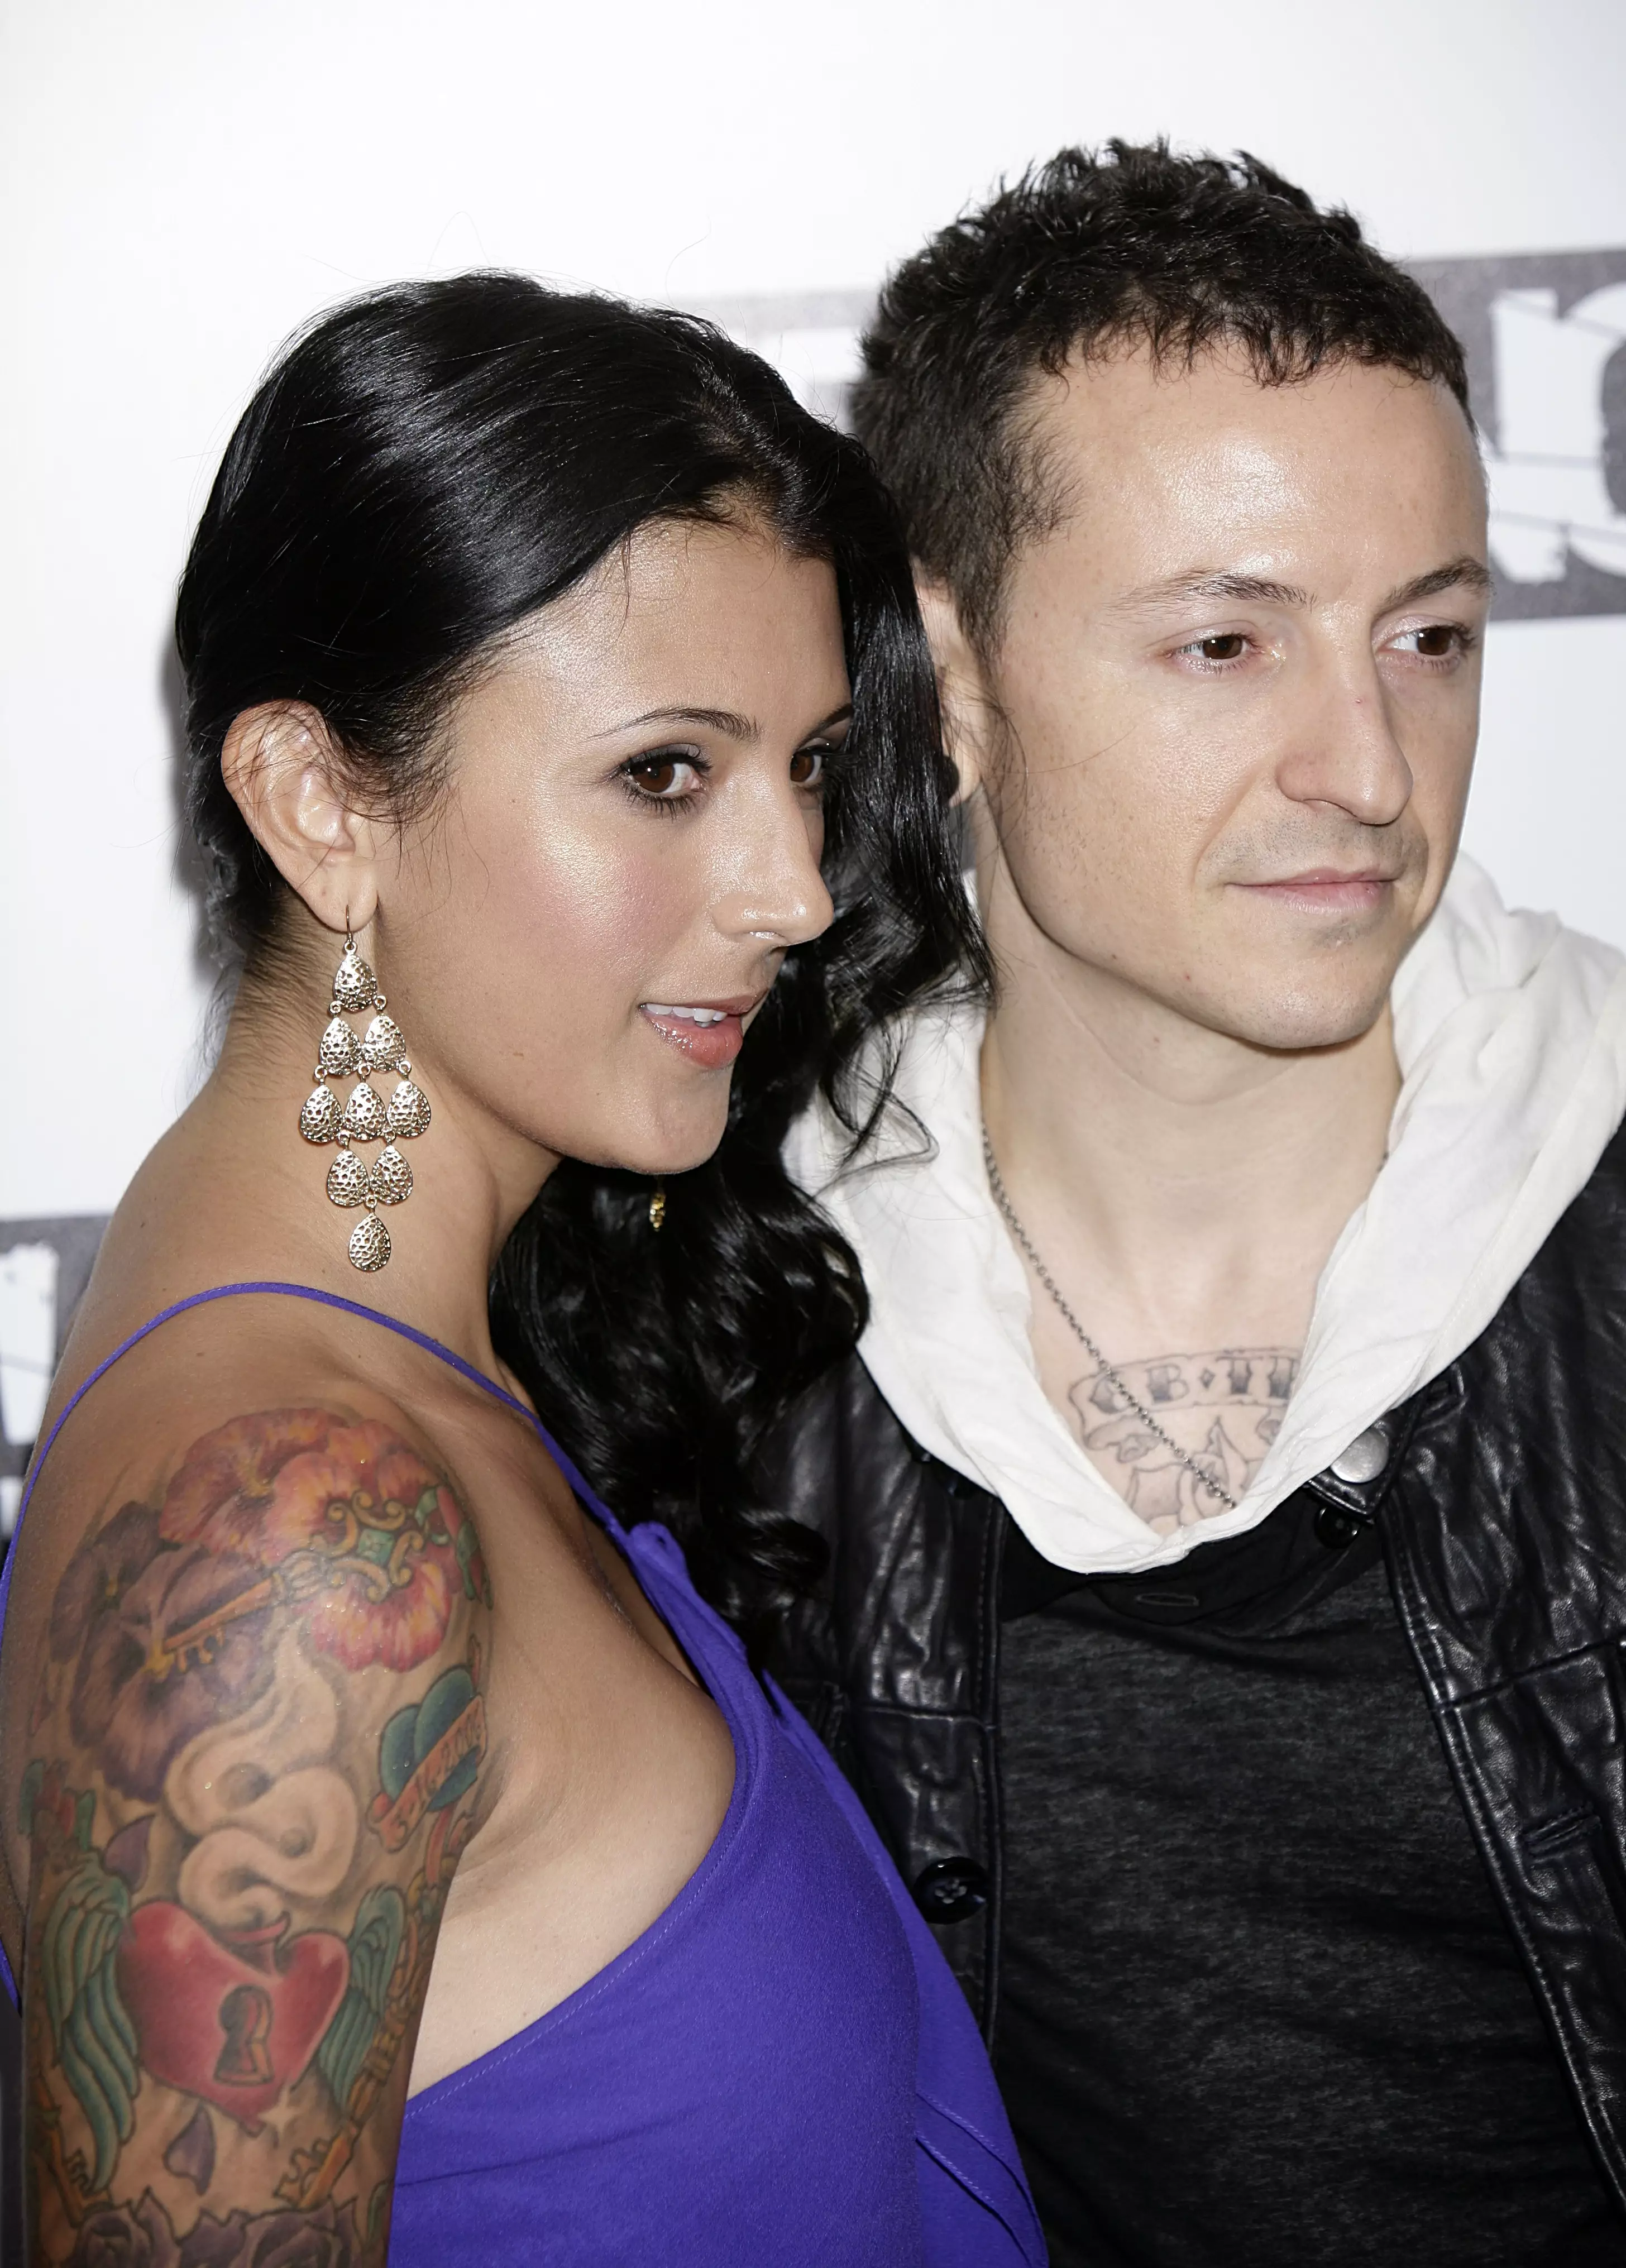 Talinda and Chester were married for 11 years.